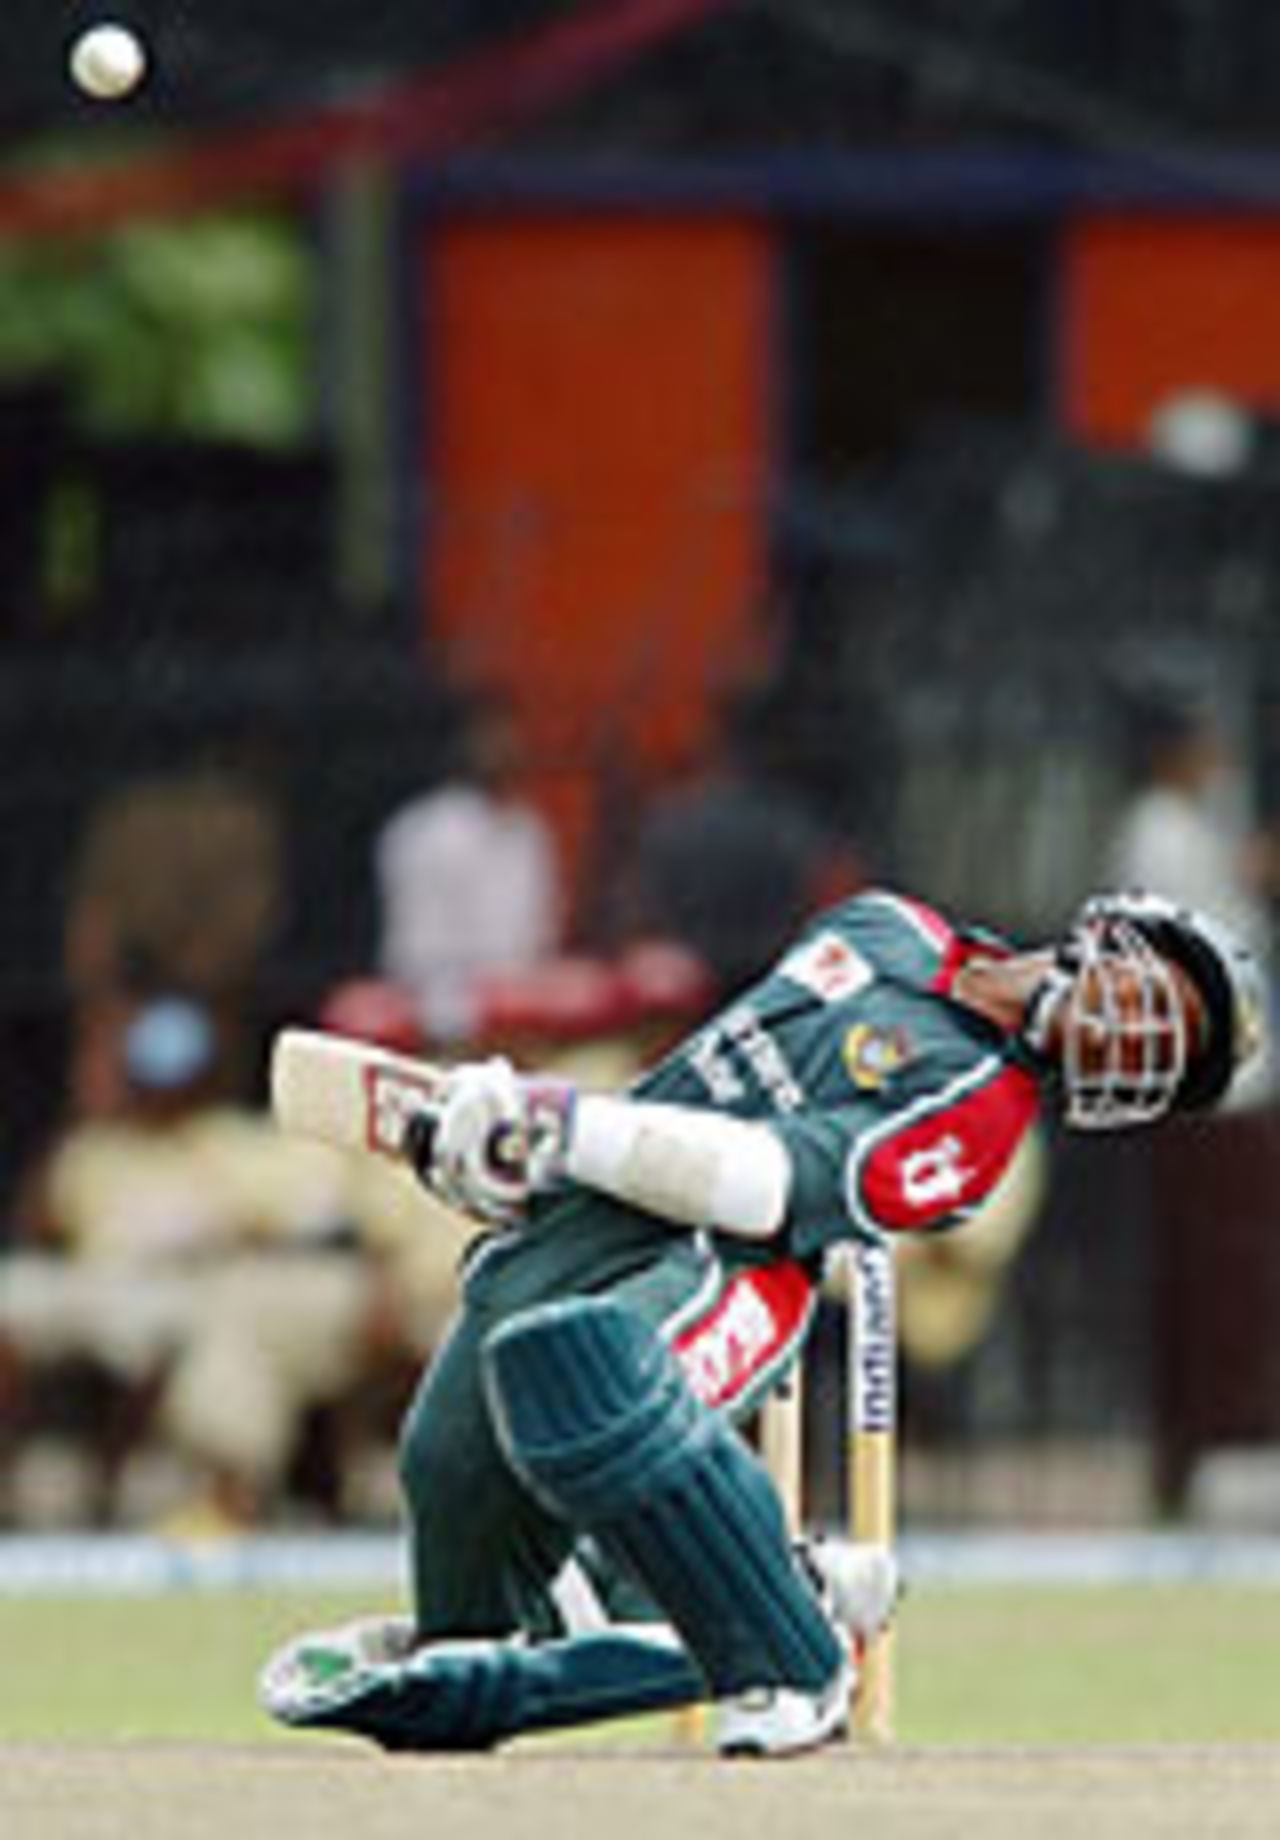 Rajin Saleh sways out the way of a bouncer, Bangladesh v Pakistan, Asia Cup, 12th match, Colombo, July 29, 2004